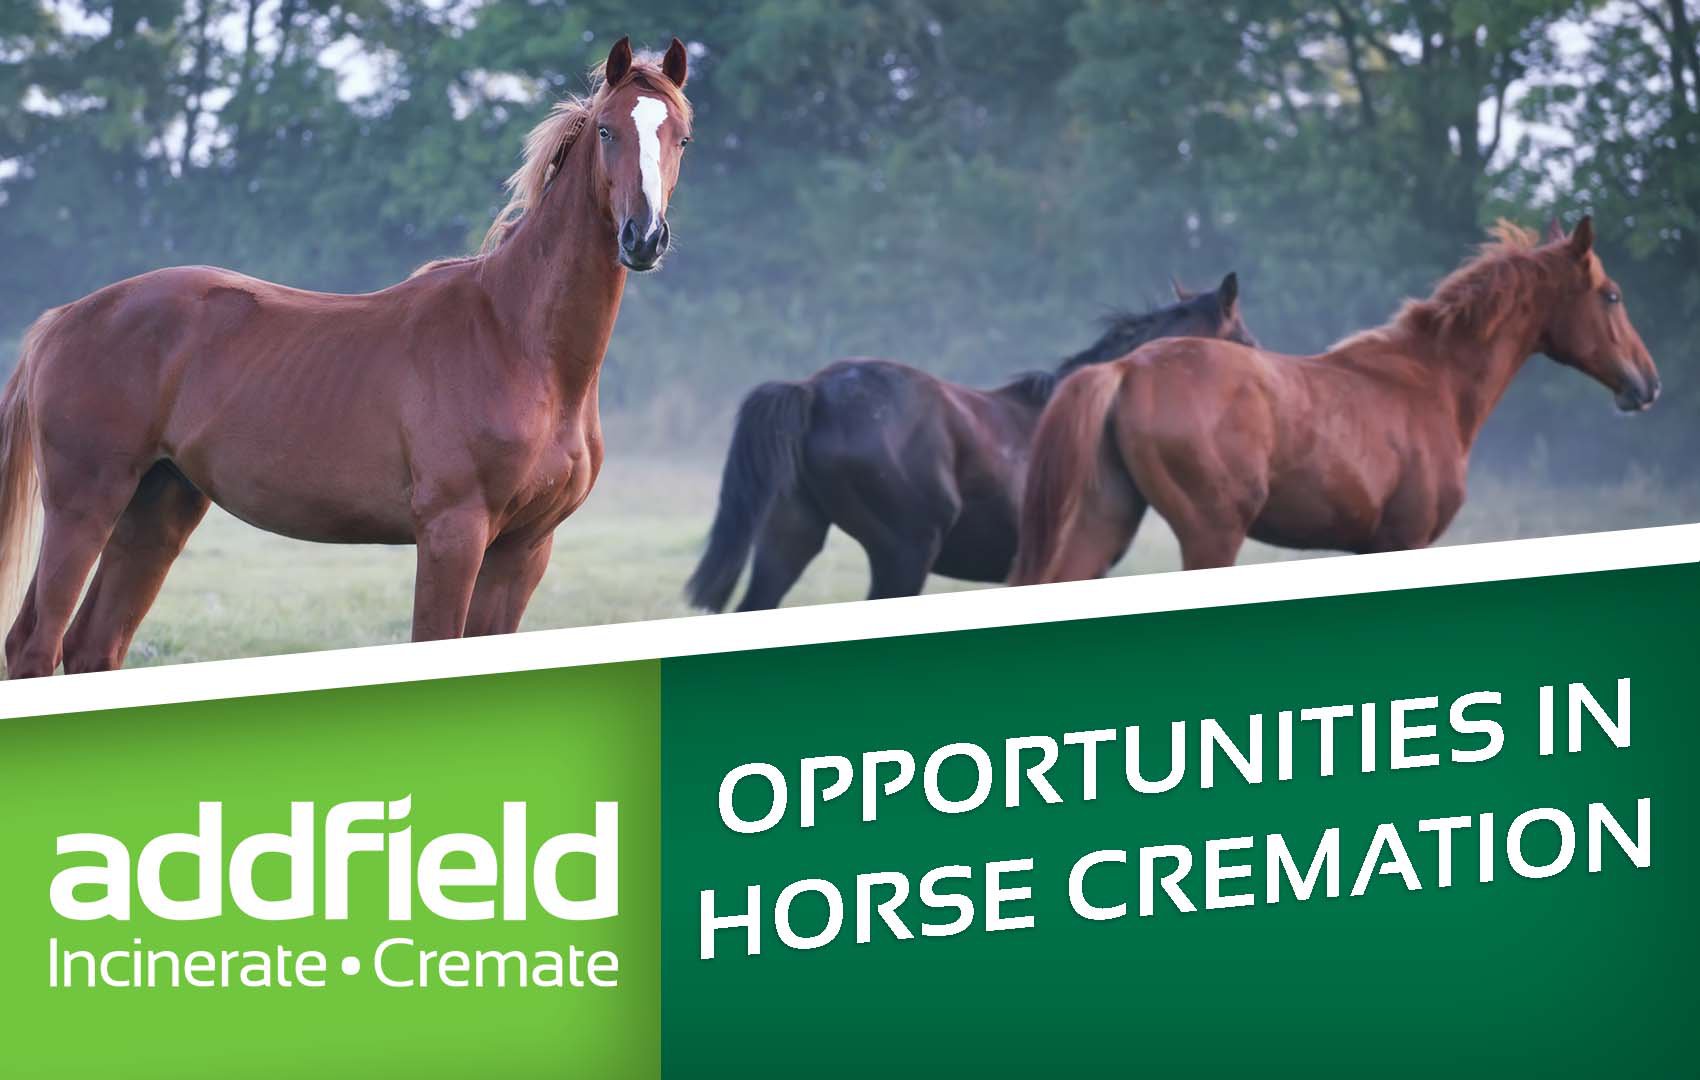 Your opportunities in Horse Cremation cover